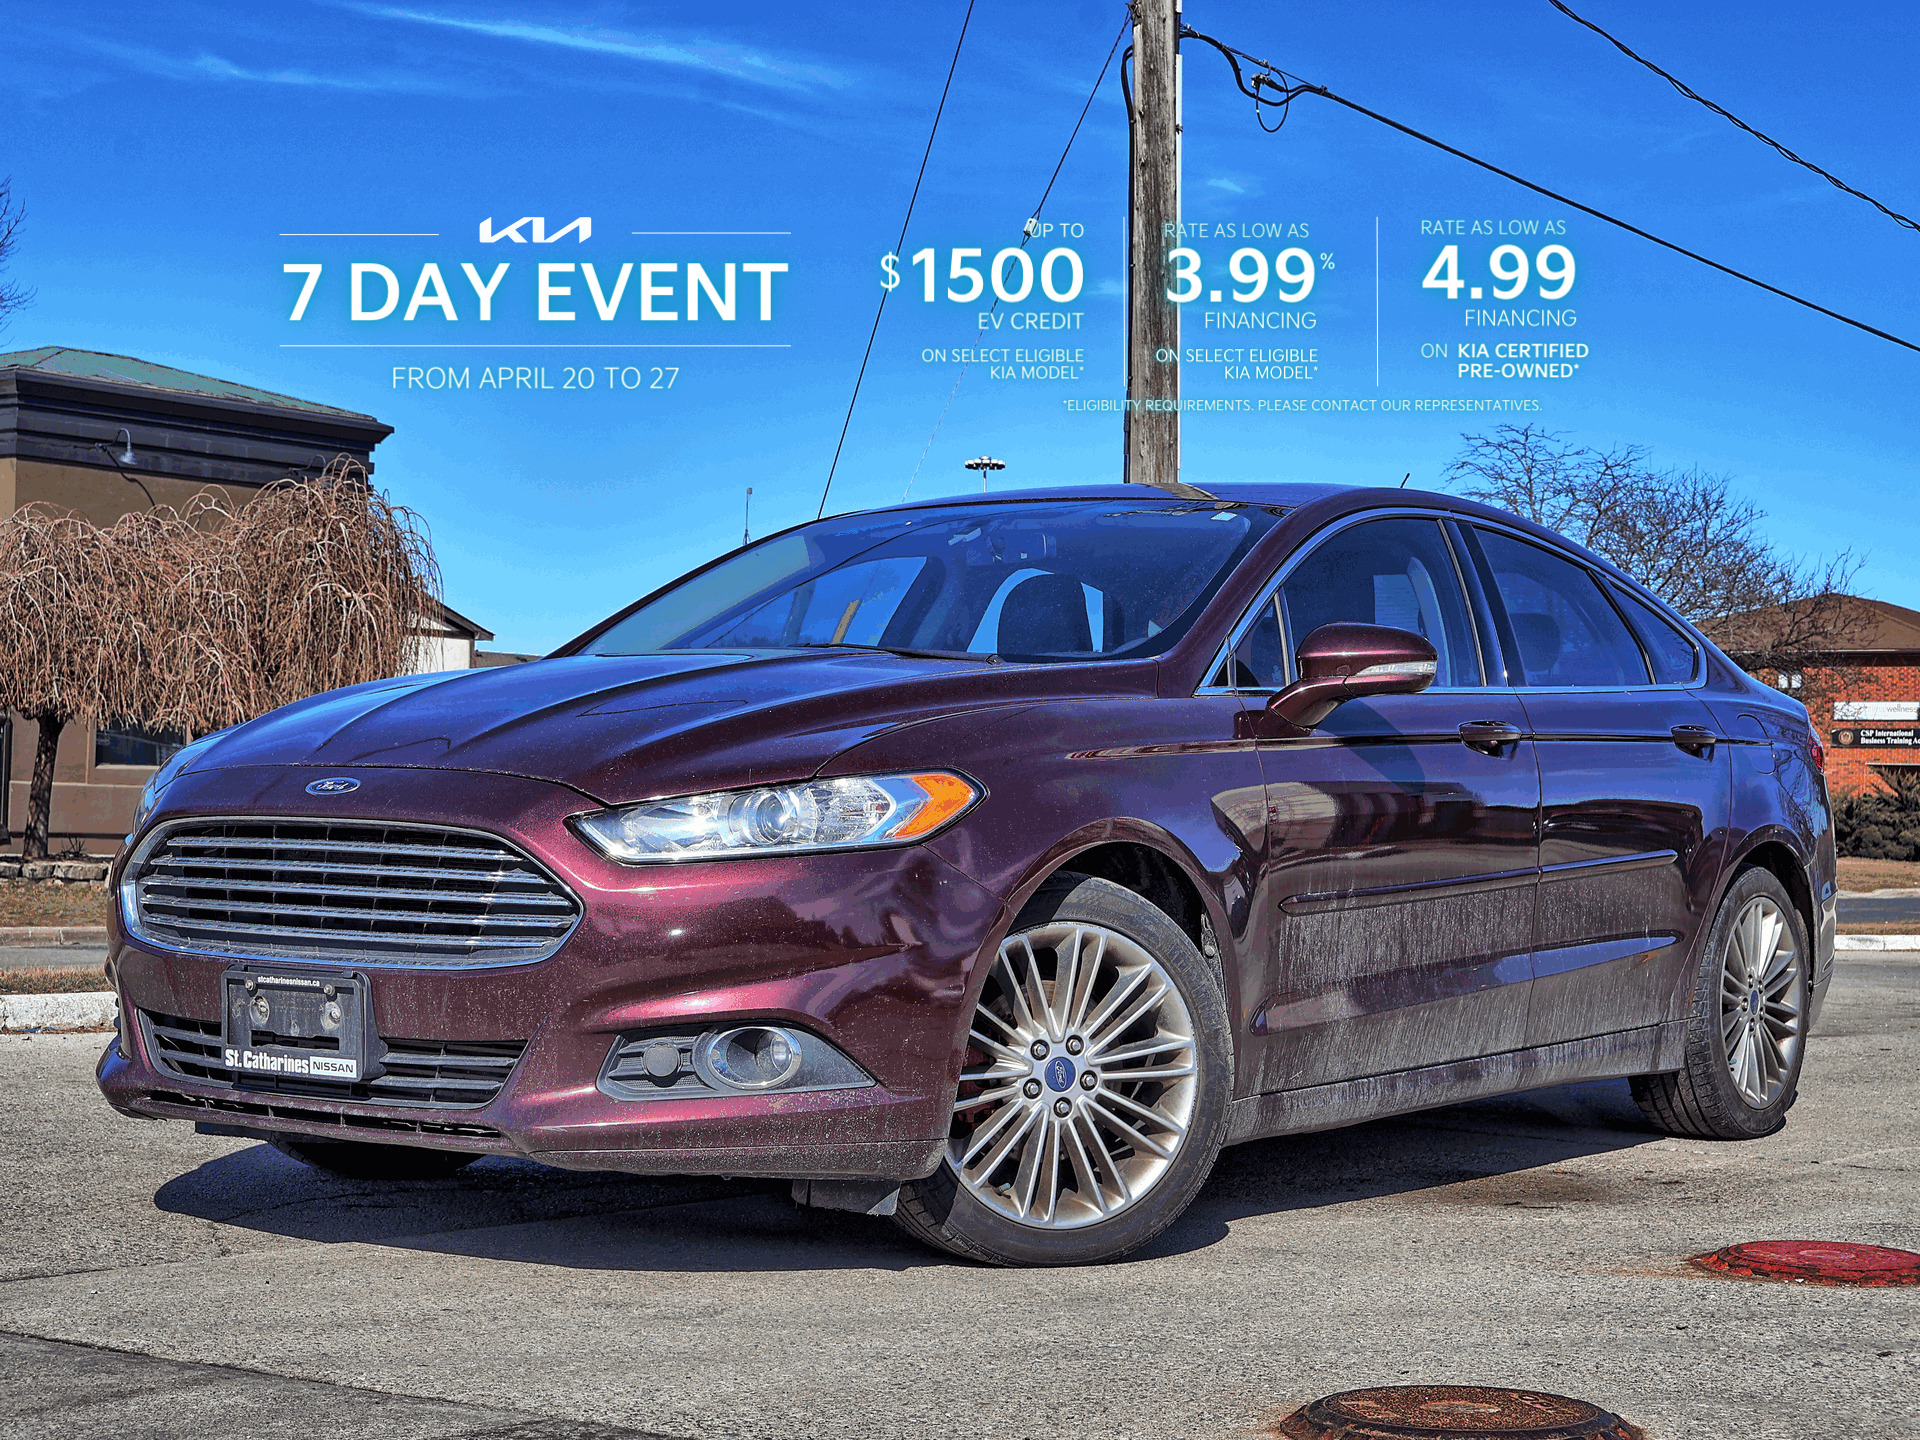 2013 Ford Fusion SE AS TRADED